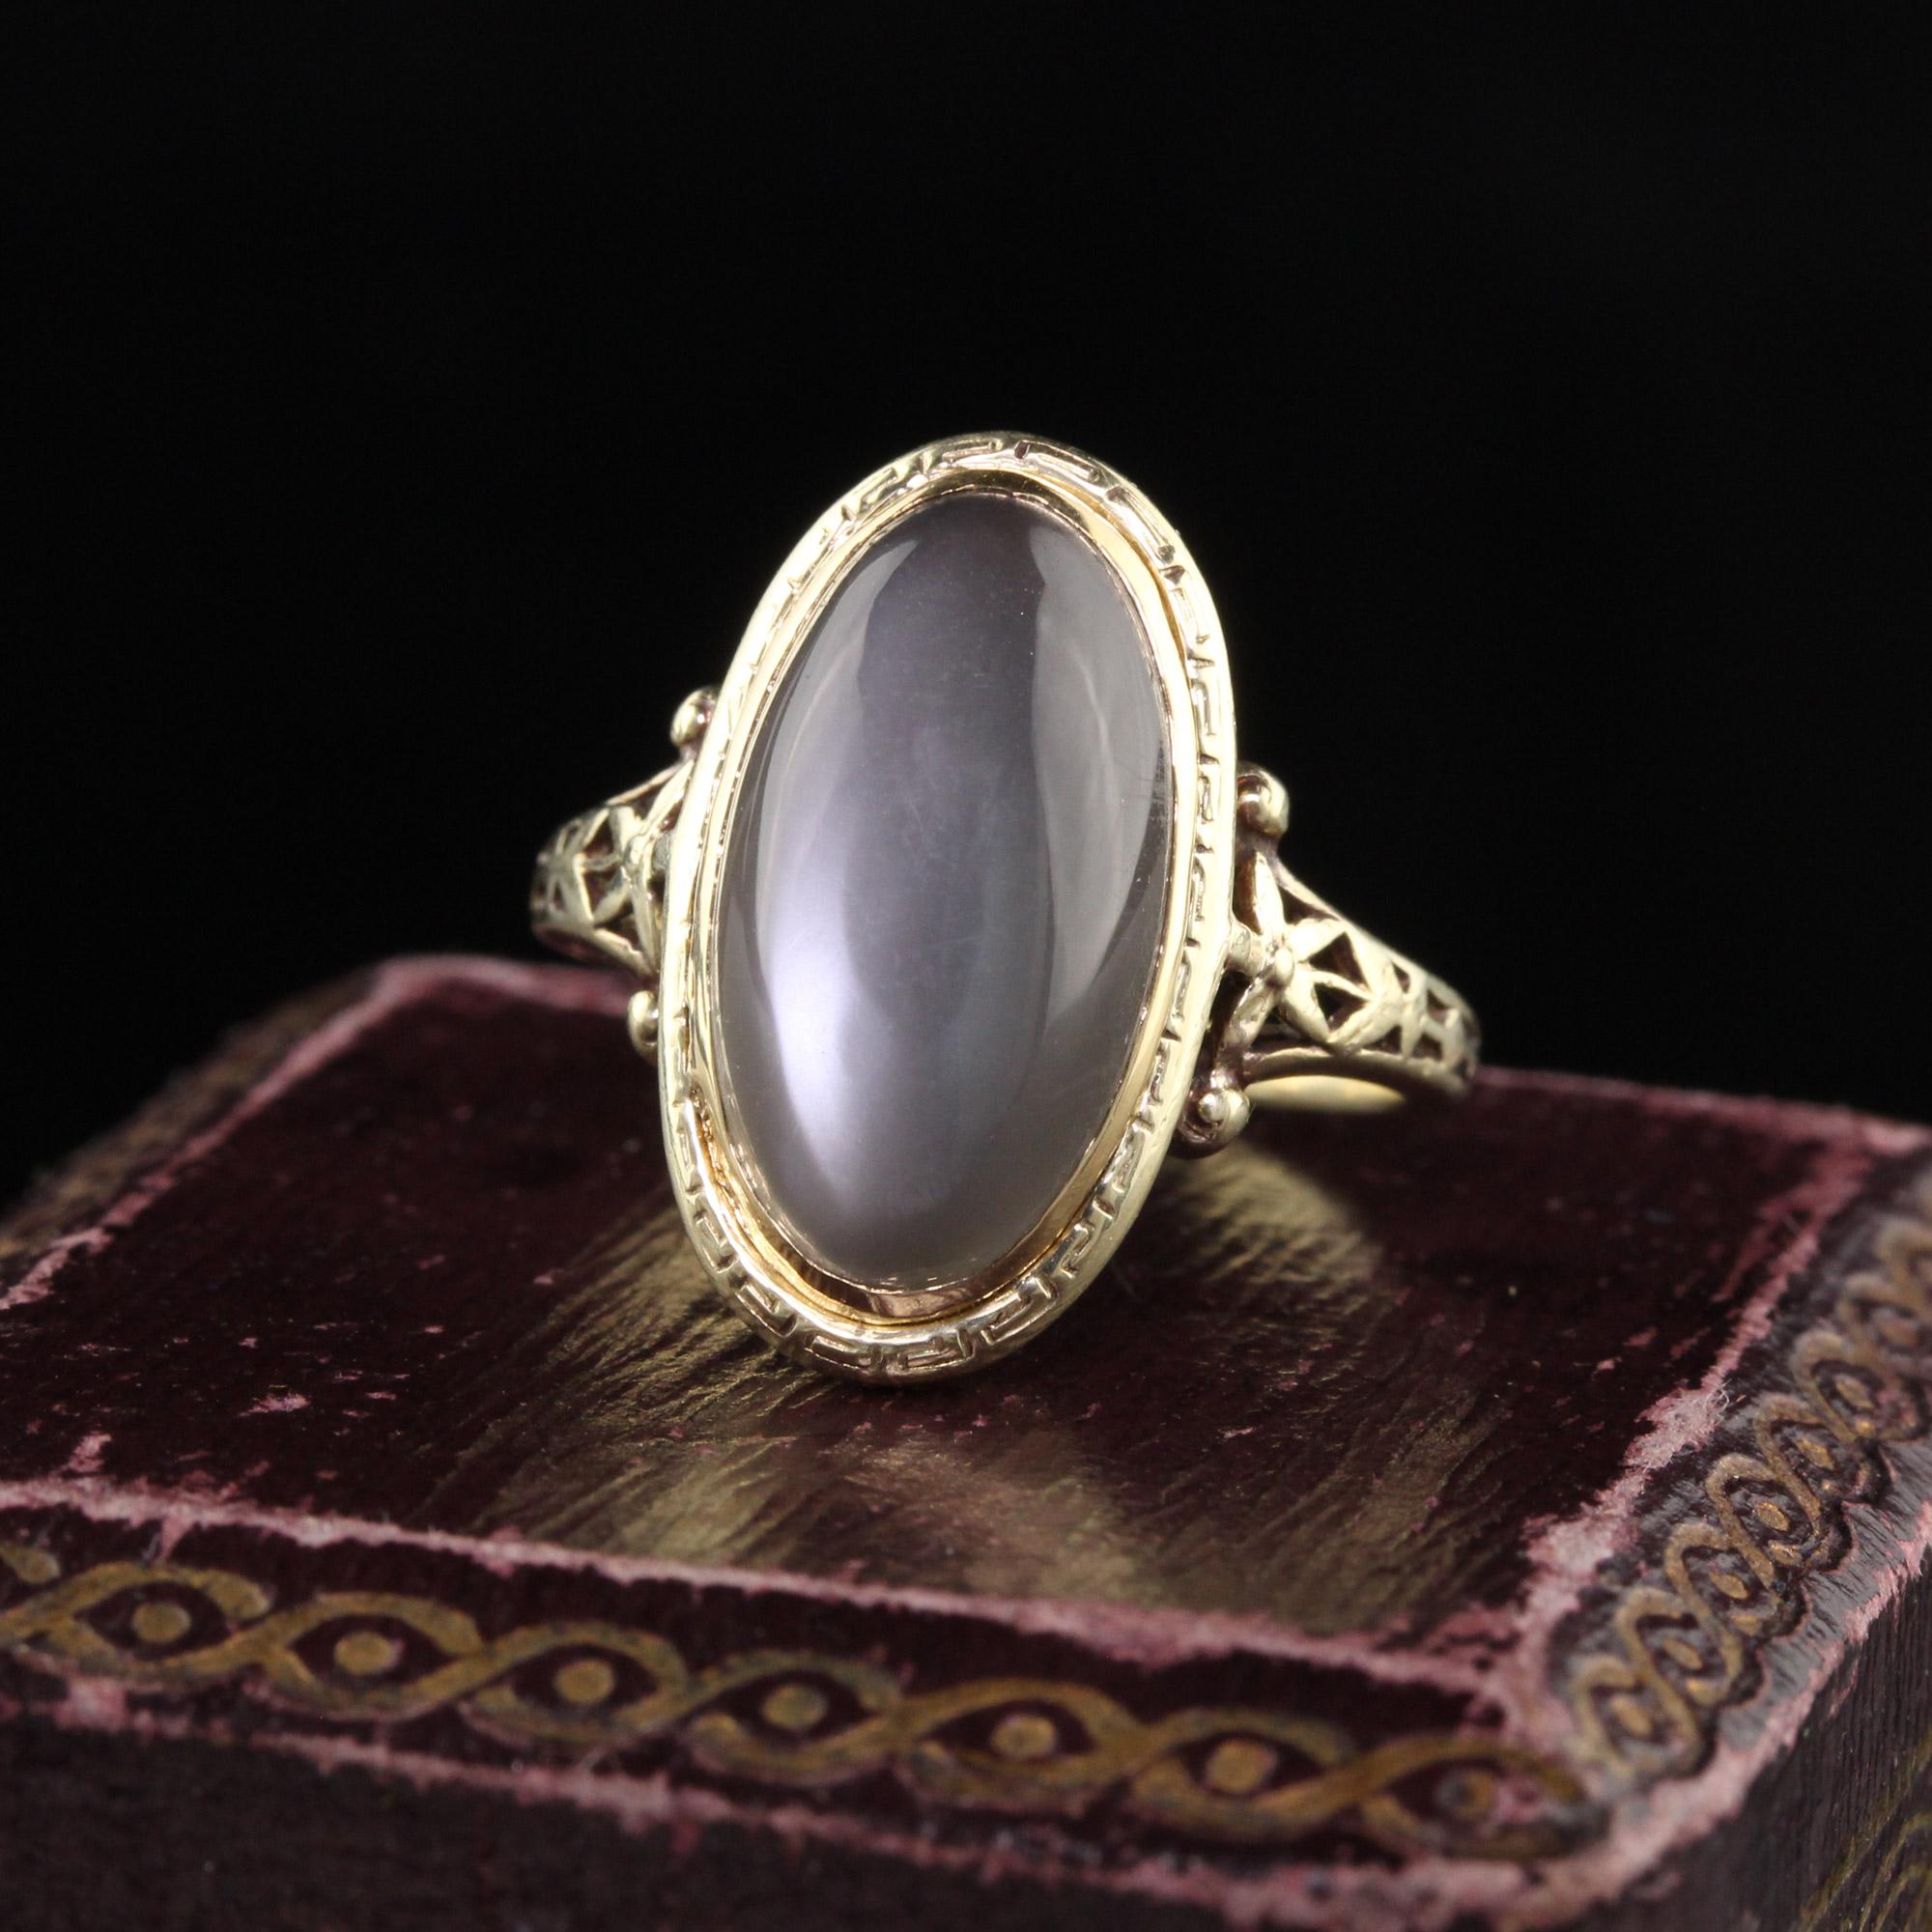 Beautiful Antique Art Deco 14K Yellow Gold Moonstone Filigree Ring. This beautiful art deco ring features an approximate 5 ct moonstone that is gray body and looks incredible. The mounting also has filigree work on the gallery.

Item #R1010

Metal: